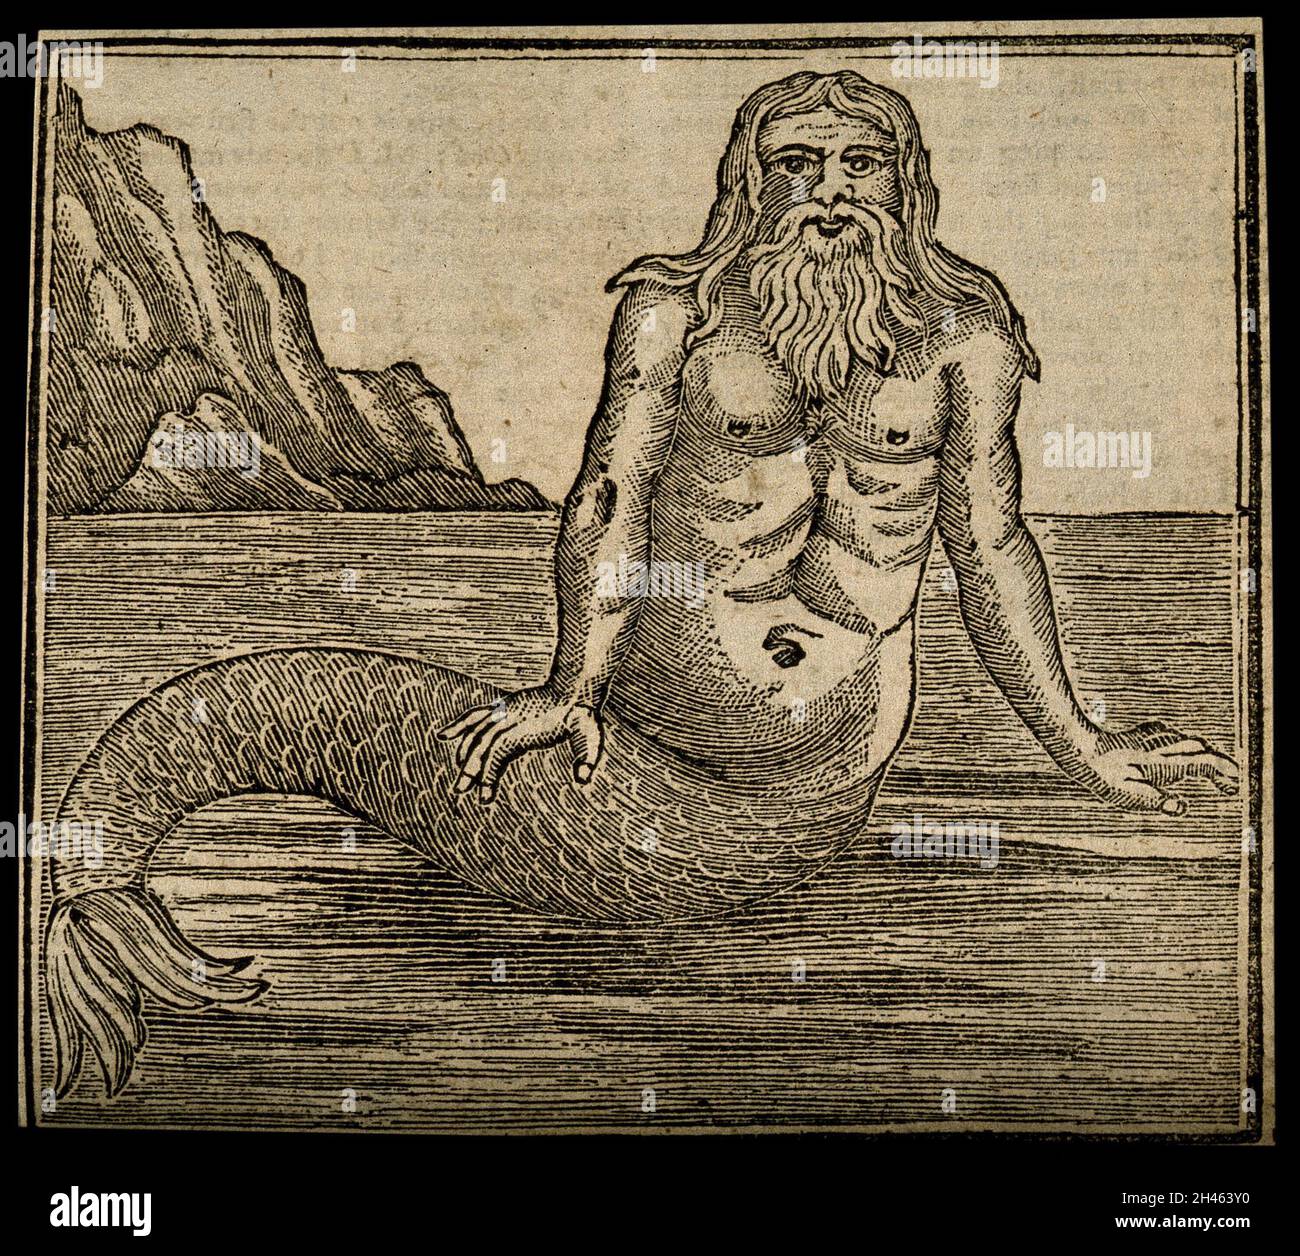 A merman, by the sea. Wood engraving. Stock Photo